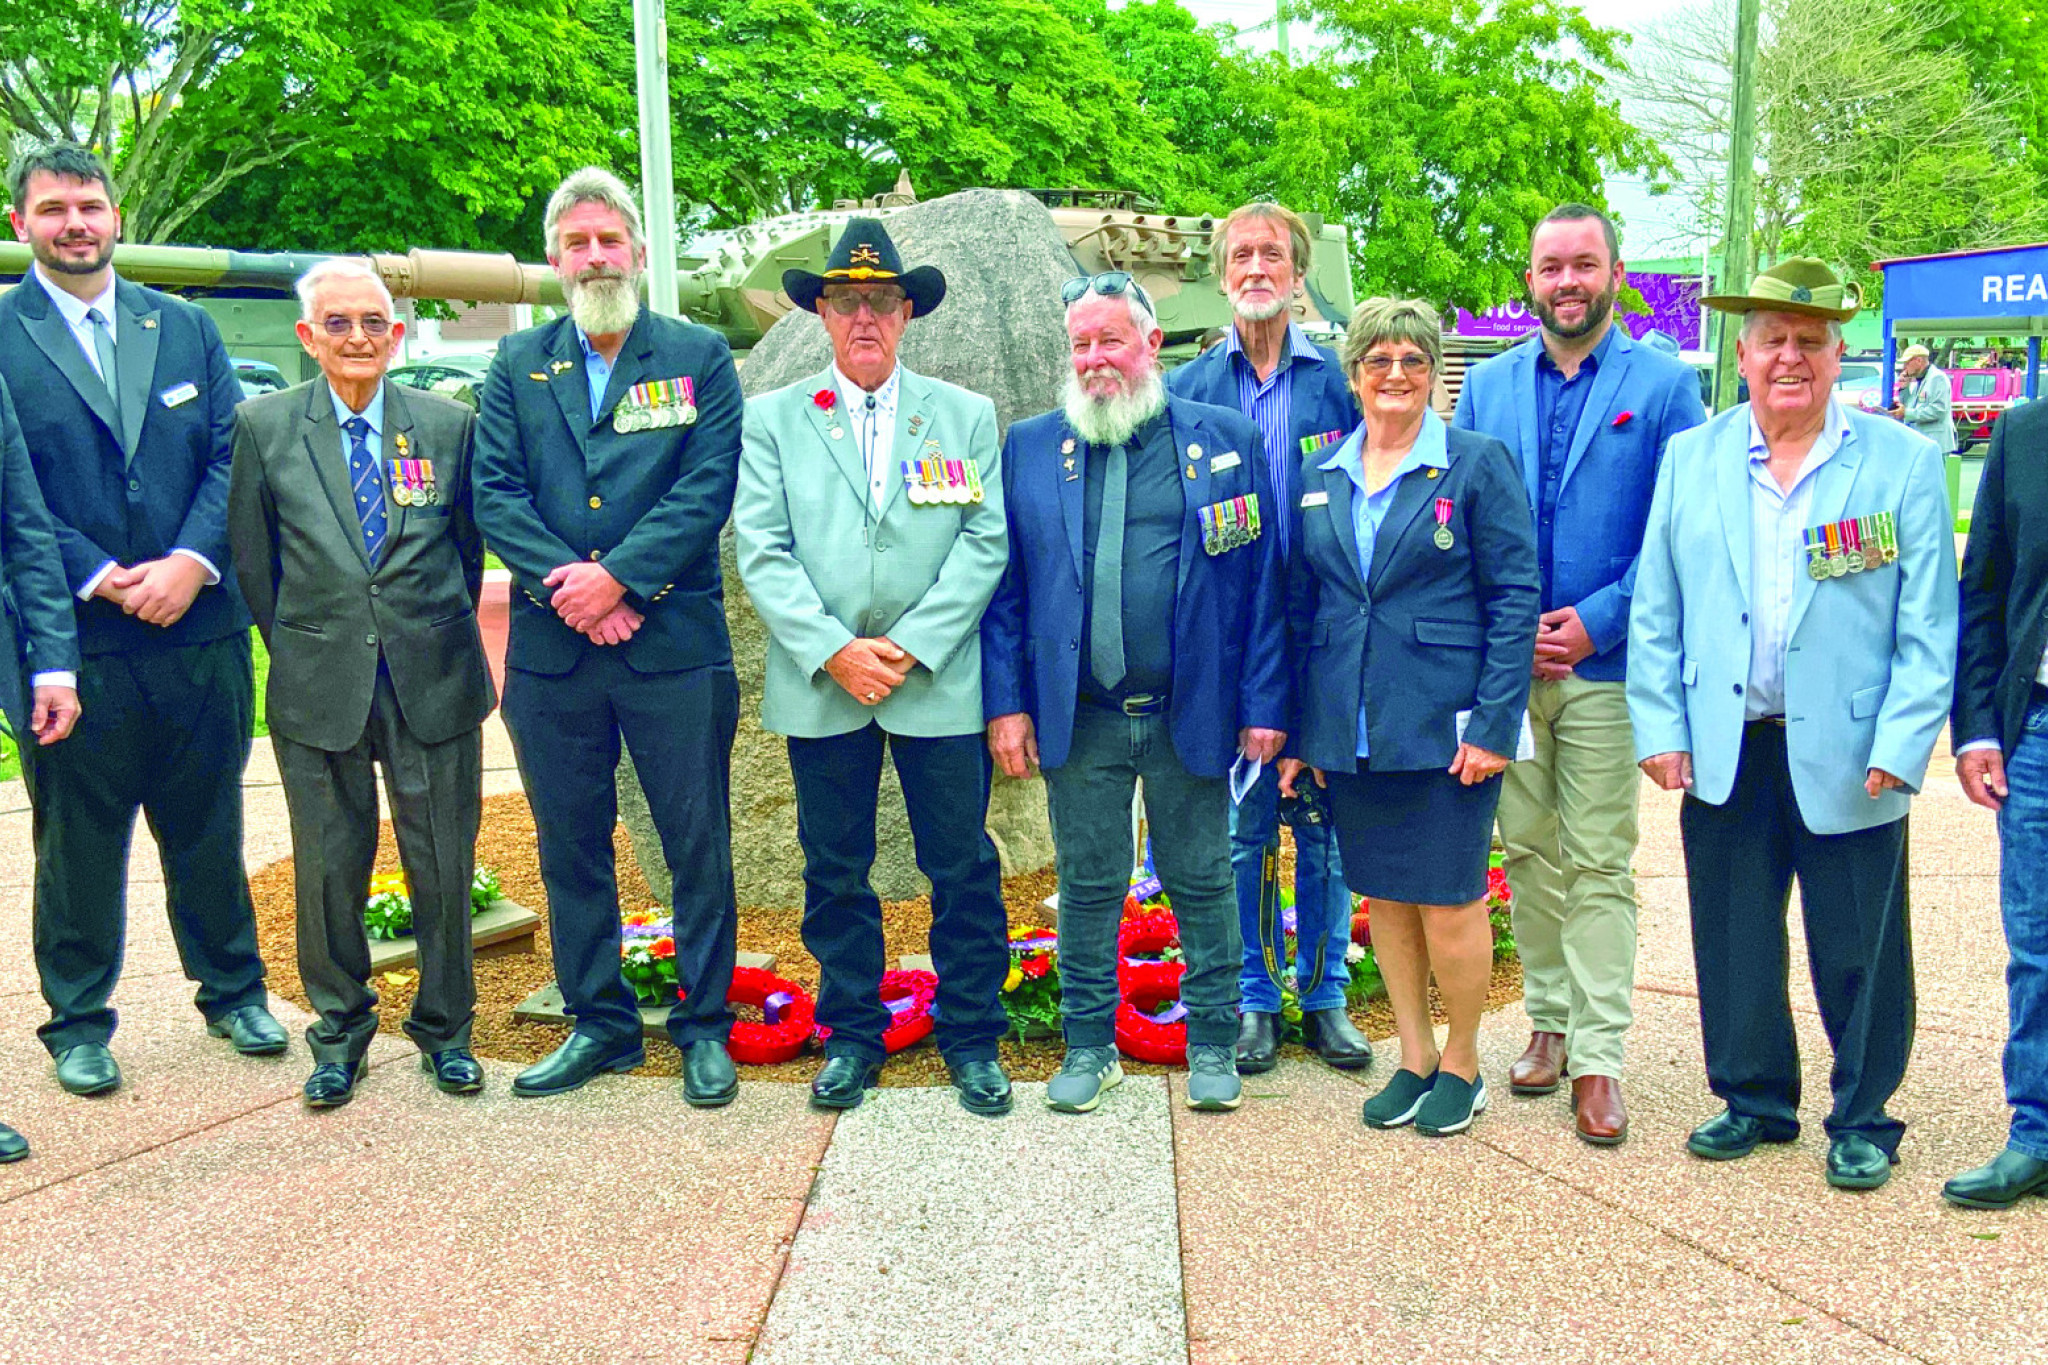 Andrew Powell, Sam Te Rure, Ken Steer, Steve McClintock, Dave Carson, Bob Patterson, Paul Rosewarne, Lyn Whatley, Tony Latter and a couple of visitors at the Woodford RSL sub branch for last Friday’s Vietnam Veterans’ Day service.